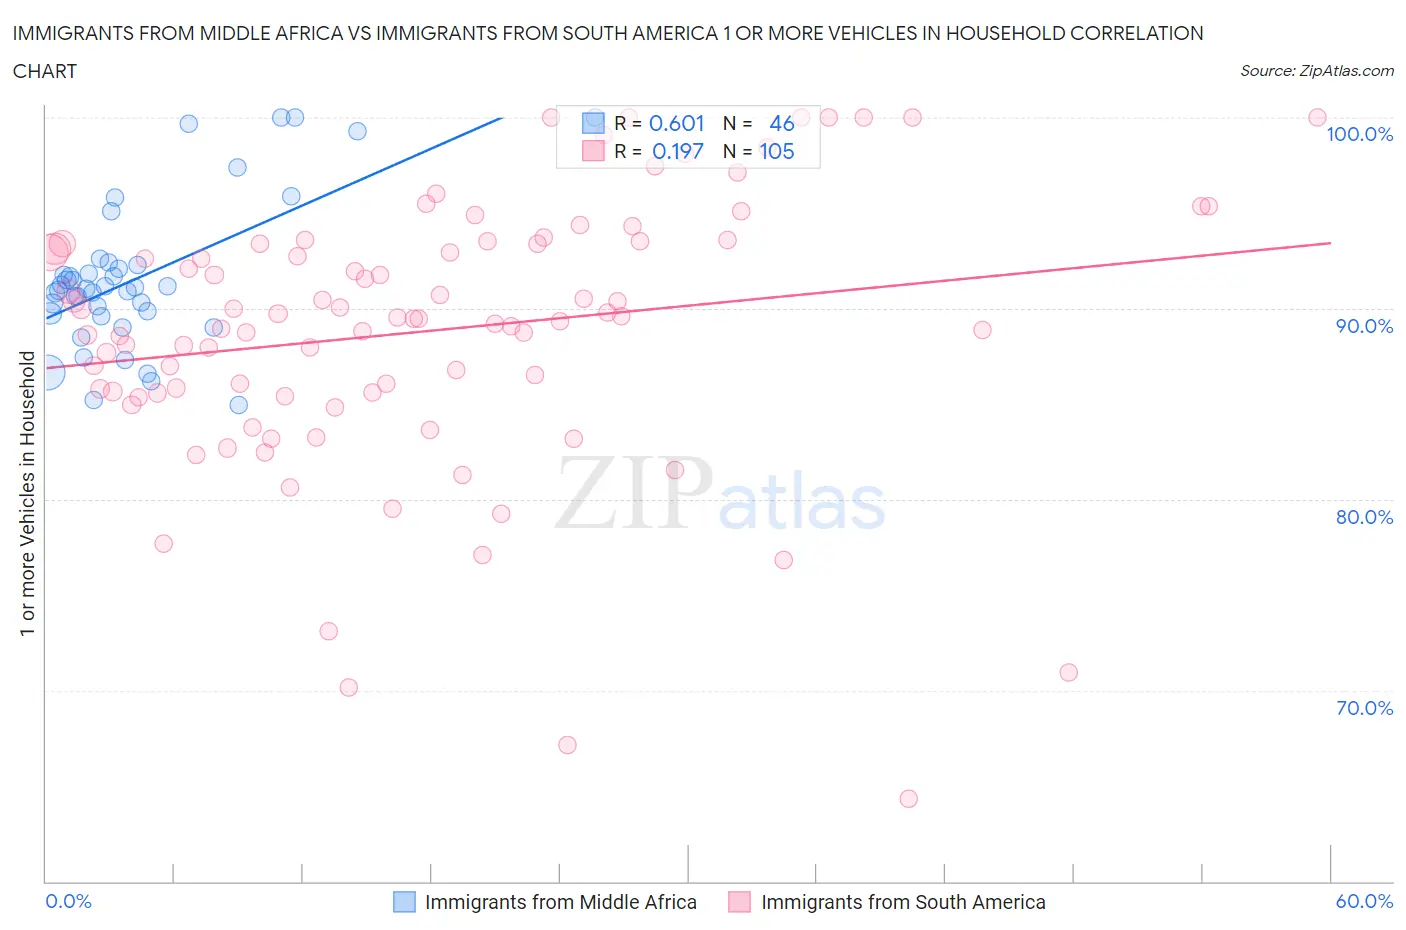 Immigrants from Middle Africa vs Immigrants from South America 1 or more Vehicles in Household